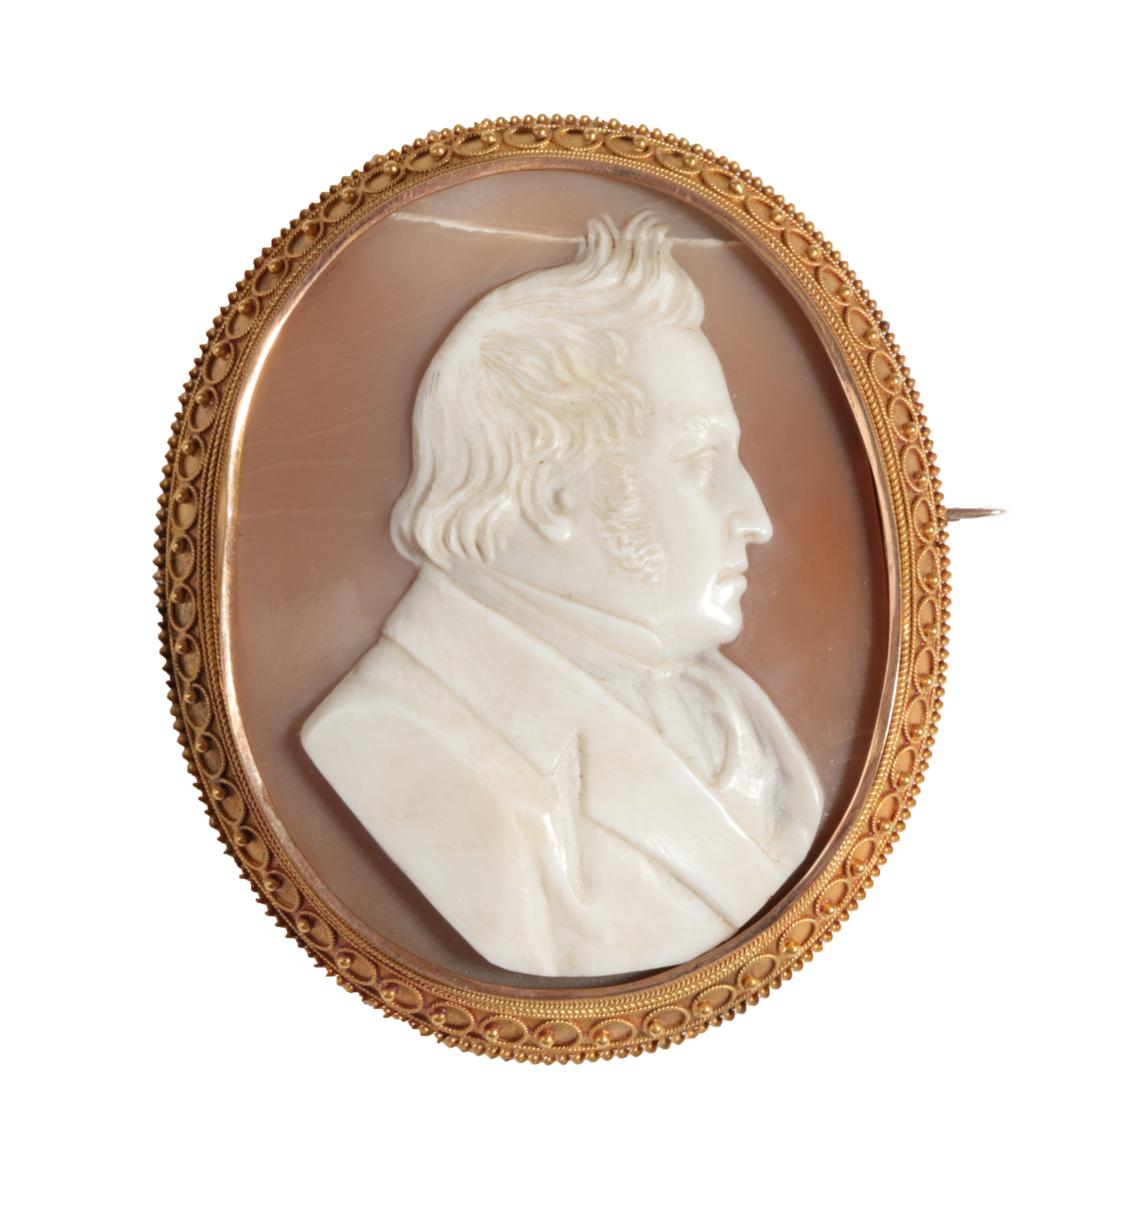 A Victorian Cameo Brooch, the shell carved to depict a gentleman, a picture enclosed in the locket